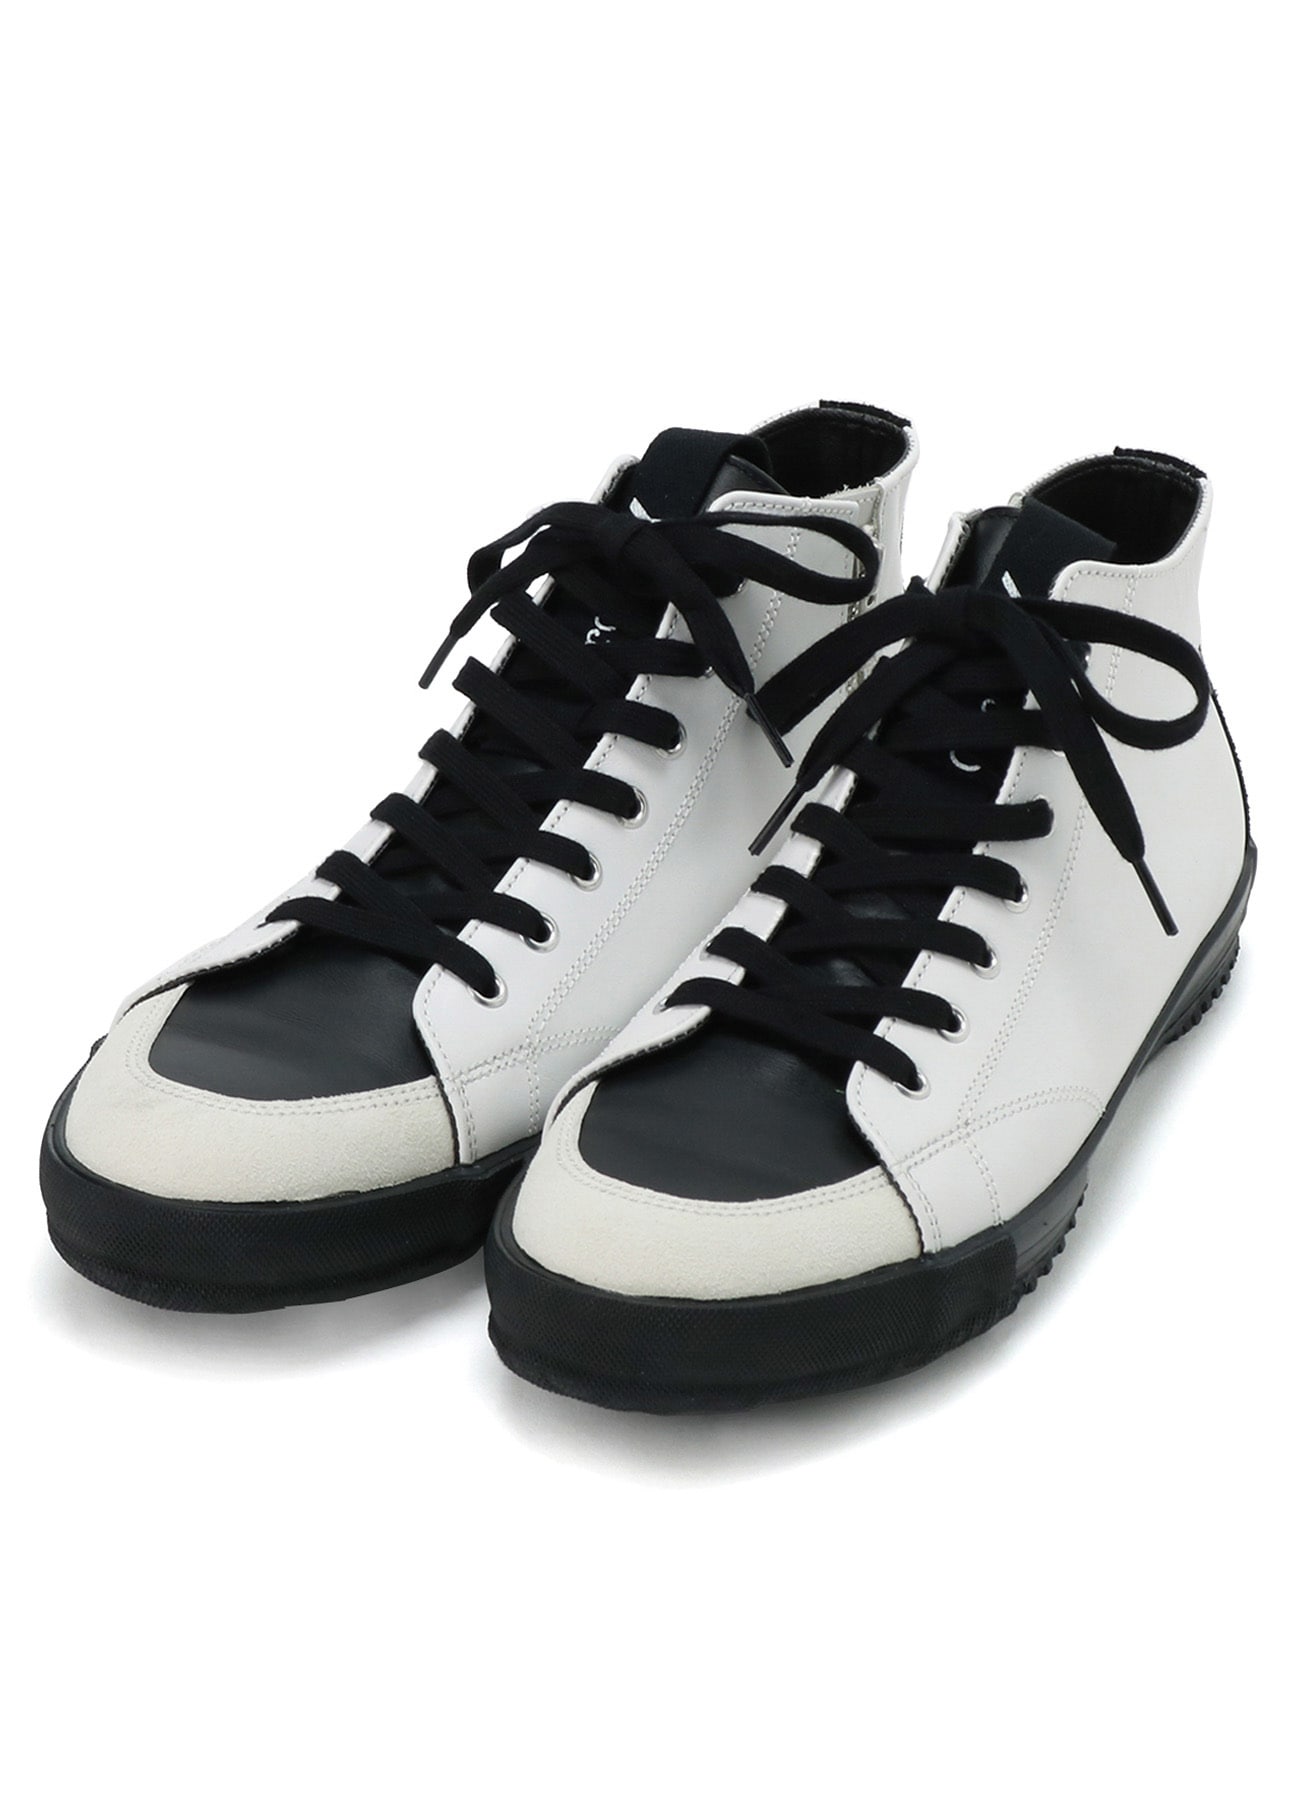 Monochrome Leather Sneakers